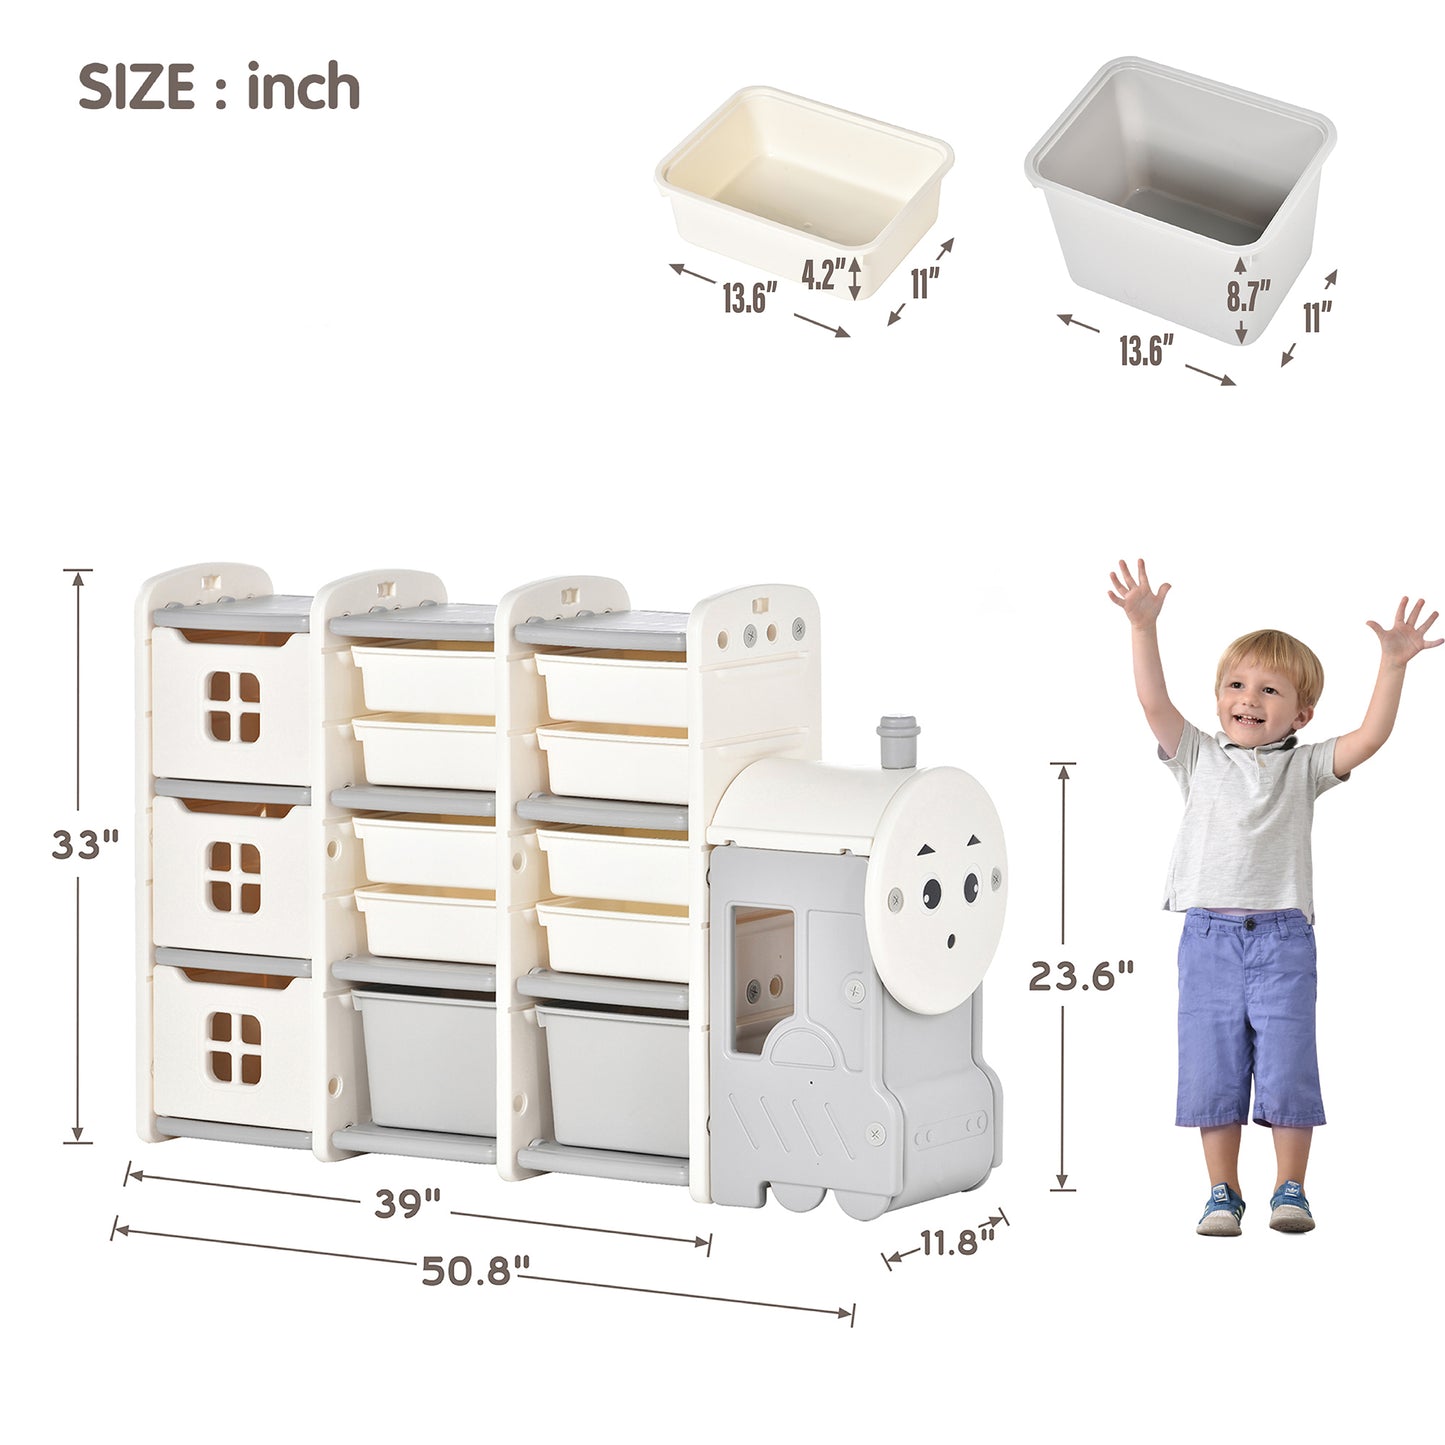 Kids Toy Storage Organizer Bin with 13 Bins and Cabinets, Multi-functional Nursery Organizer Kids Furniture Set Toy Storage Cabinet Unit with HDPE Shelf and Bins for Playroom, Bedroom, Living Room